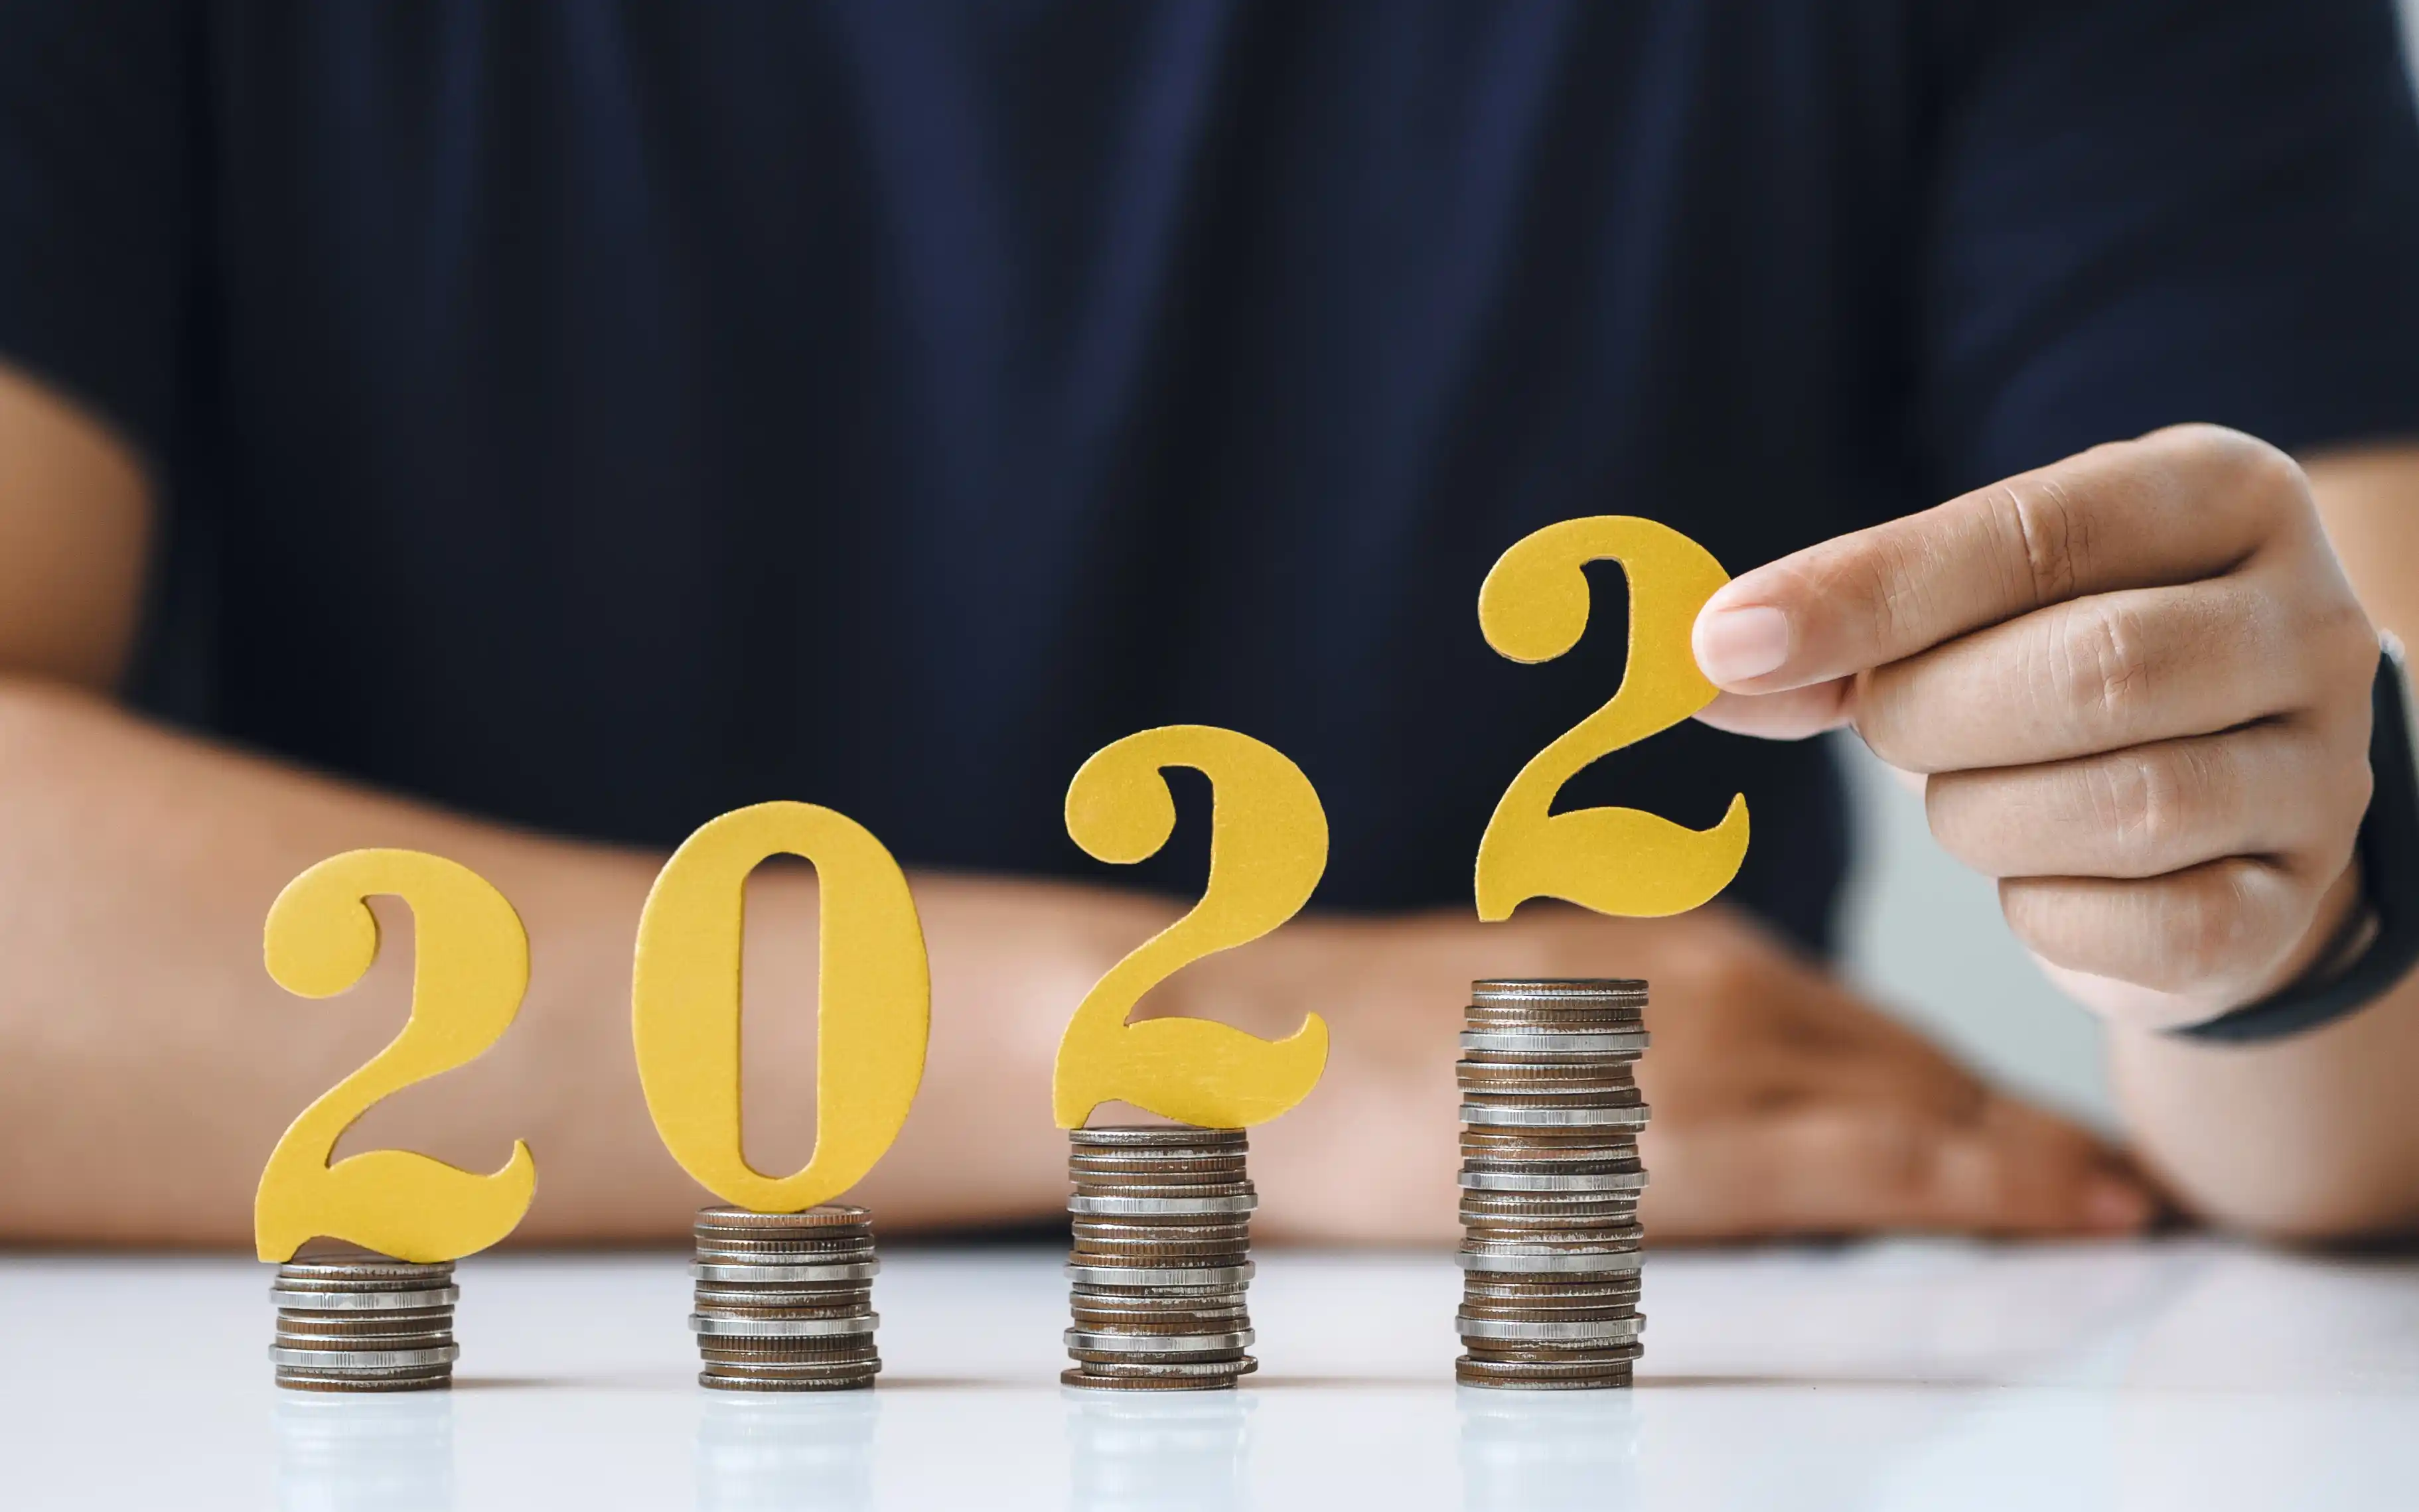 New Year’s Resolutions 2022: Make More Money